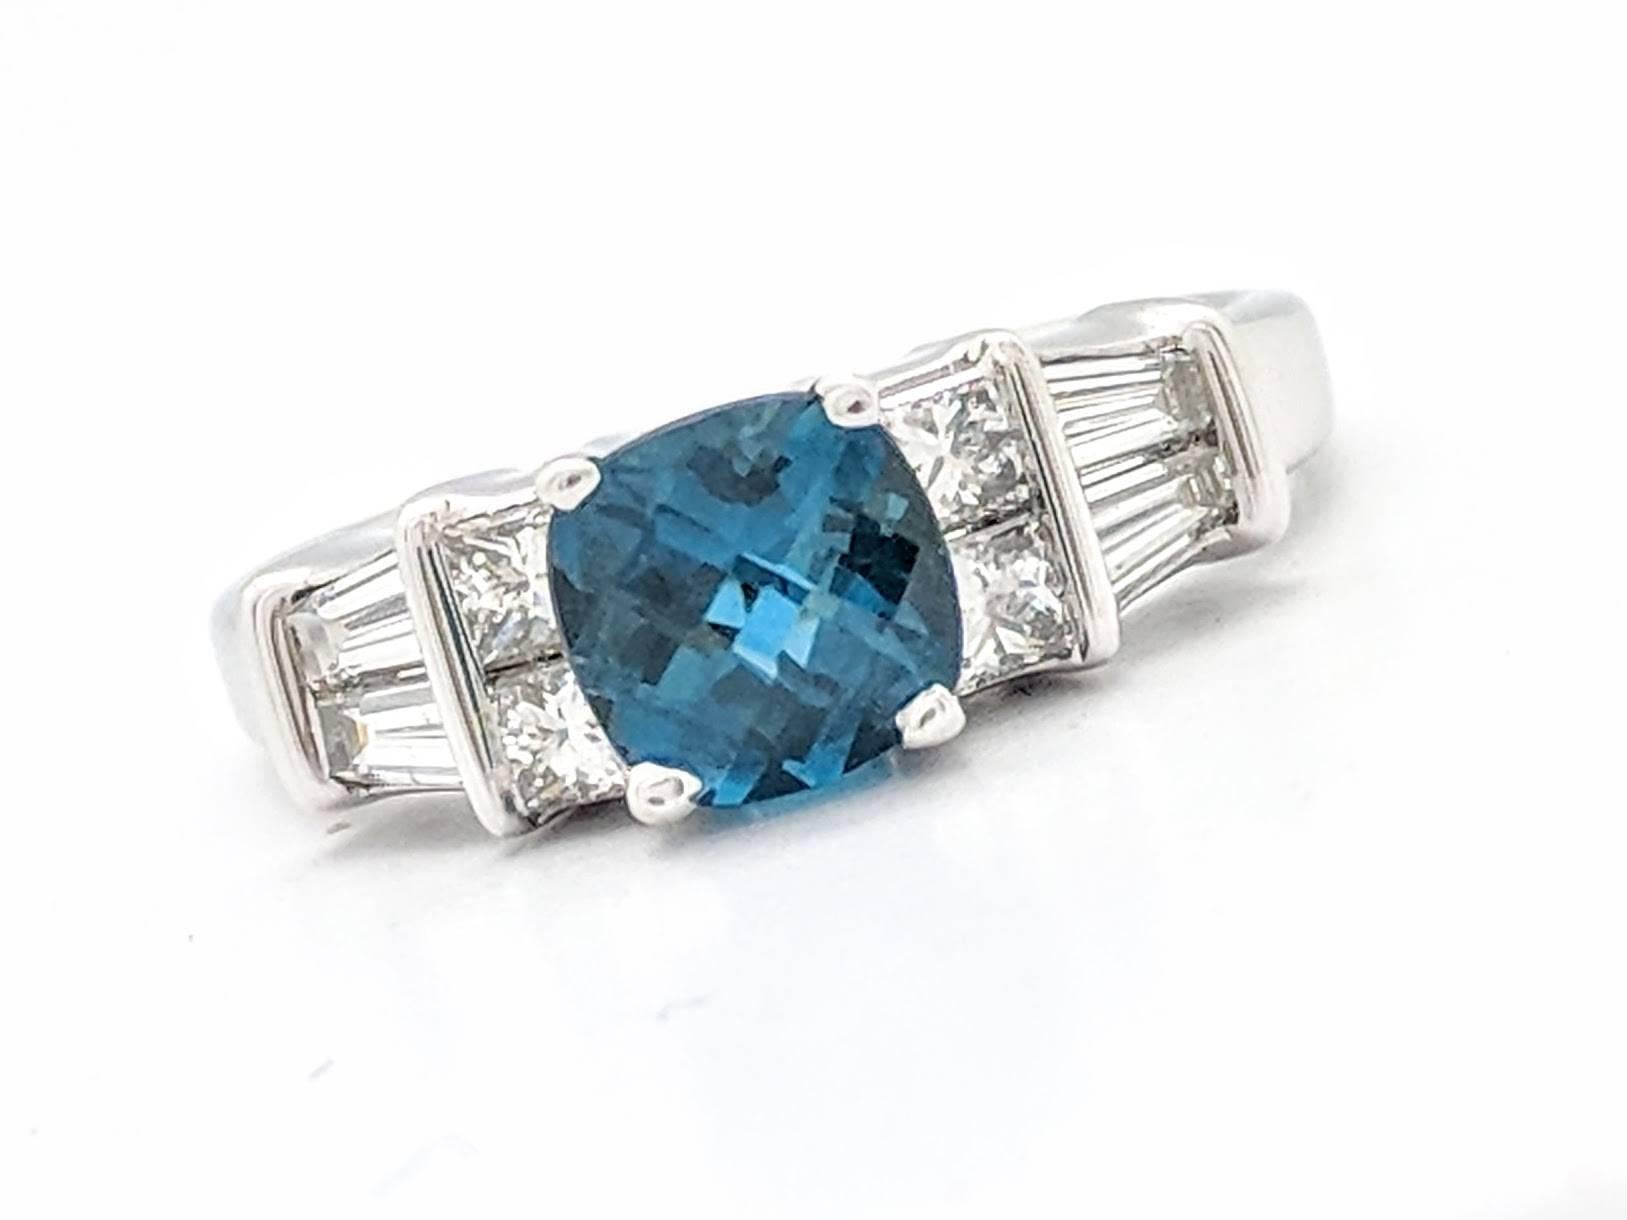  Ladies 18k White Gold .75ct Cushion Cut London Blue Topaz & Diamond Ring

You are viewing a beautiful London blue topaz & diamond ring. This ring is crafted from 18k white gold and weighs 4 grams. It features one (1) .75ct natural cushion cut